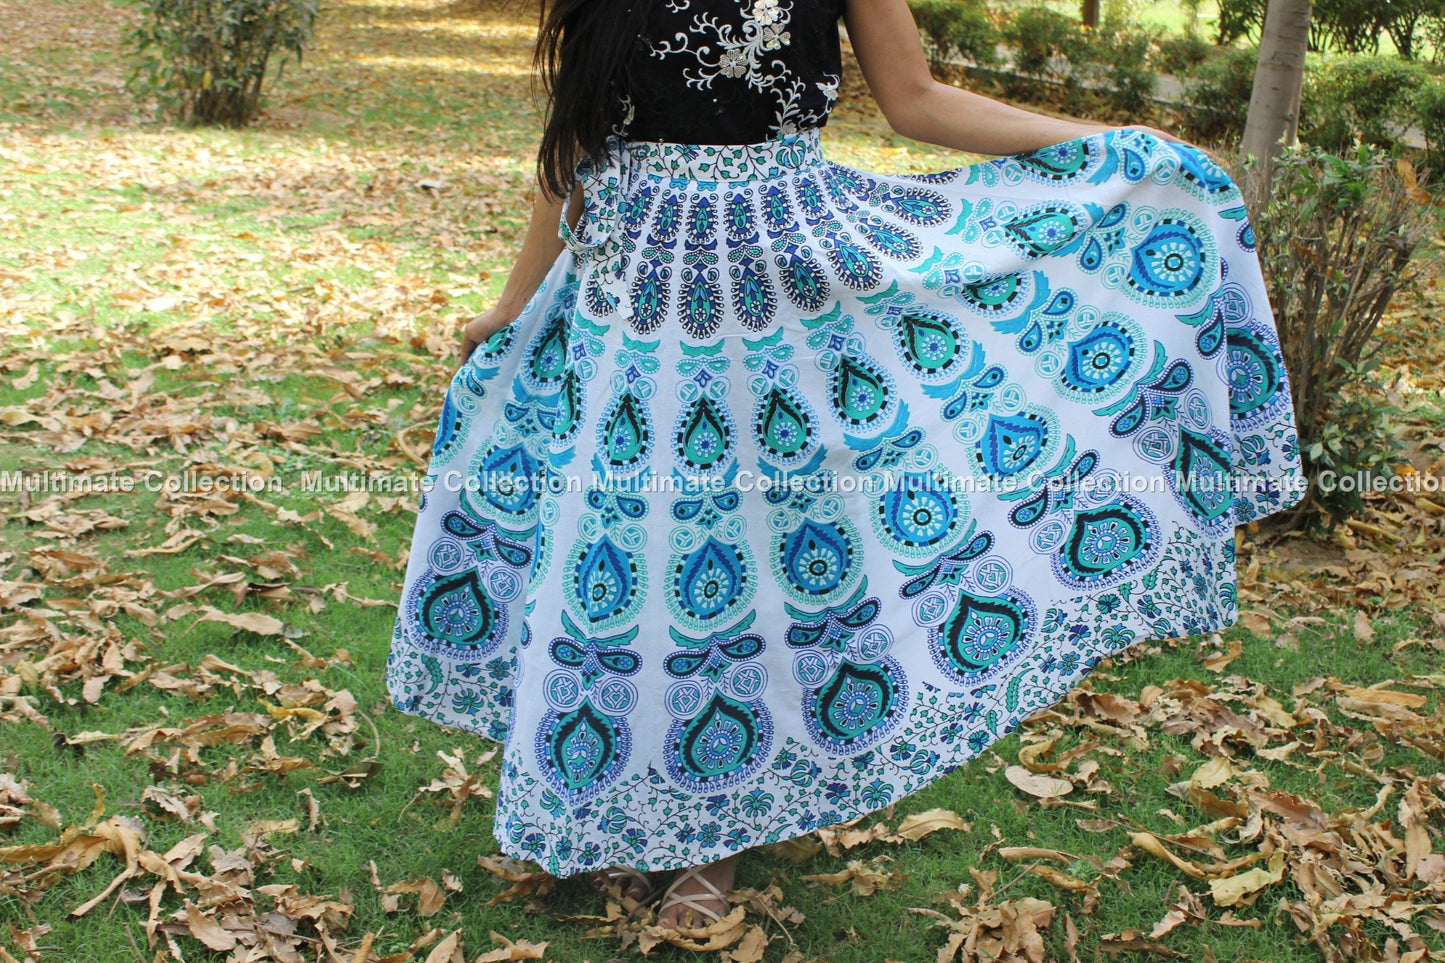 Handmade Festival Skirt: Touch of Boho-Chic to Your Wardrobe with this Gypsy-Inspired Clothing Skirt, home outfit,hippie skirt, fairy skirt